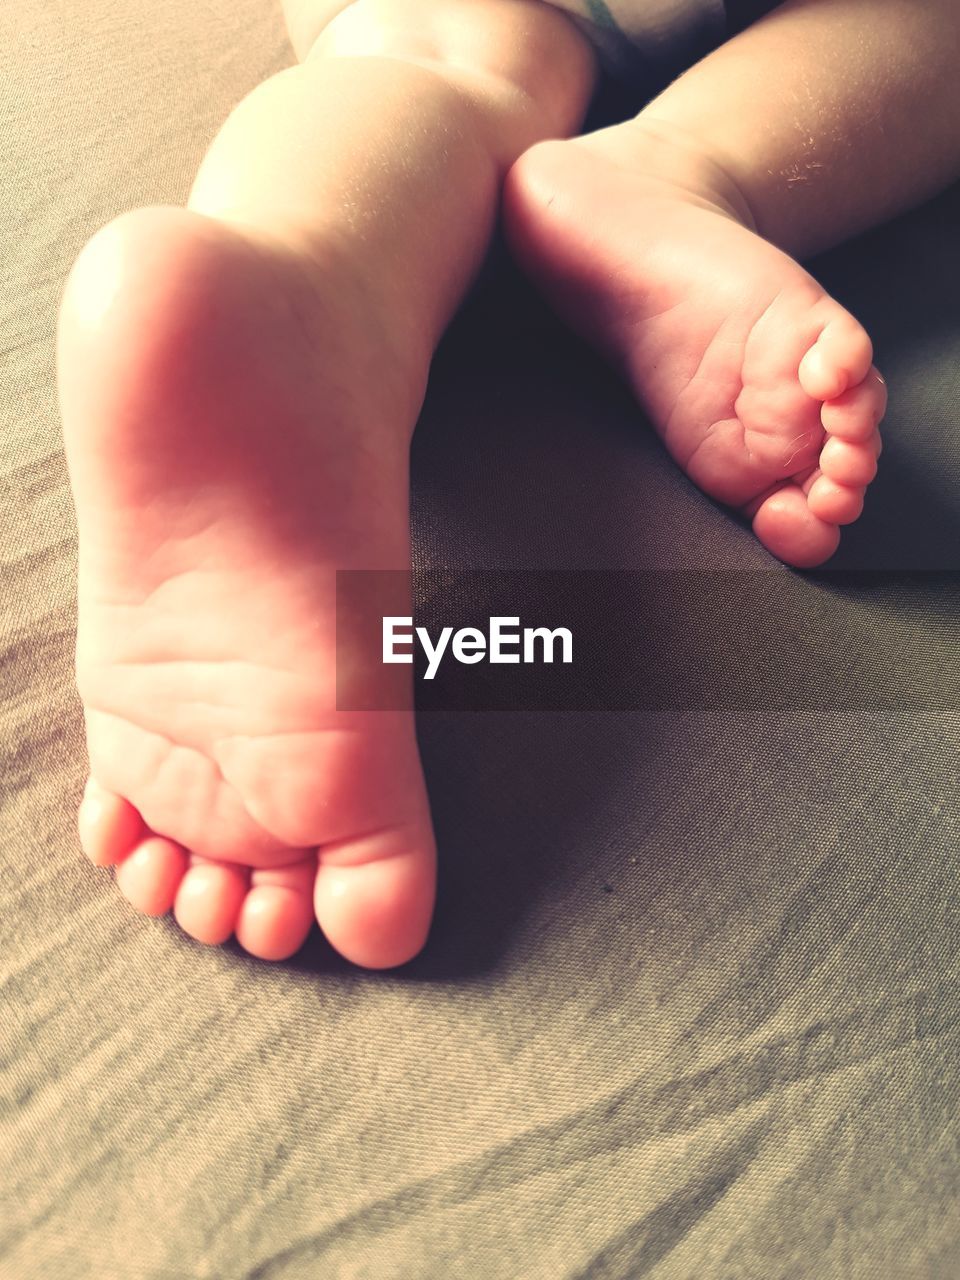 CLOSE-UP OF BABY FEET ON BED